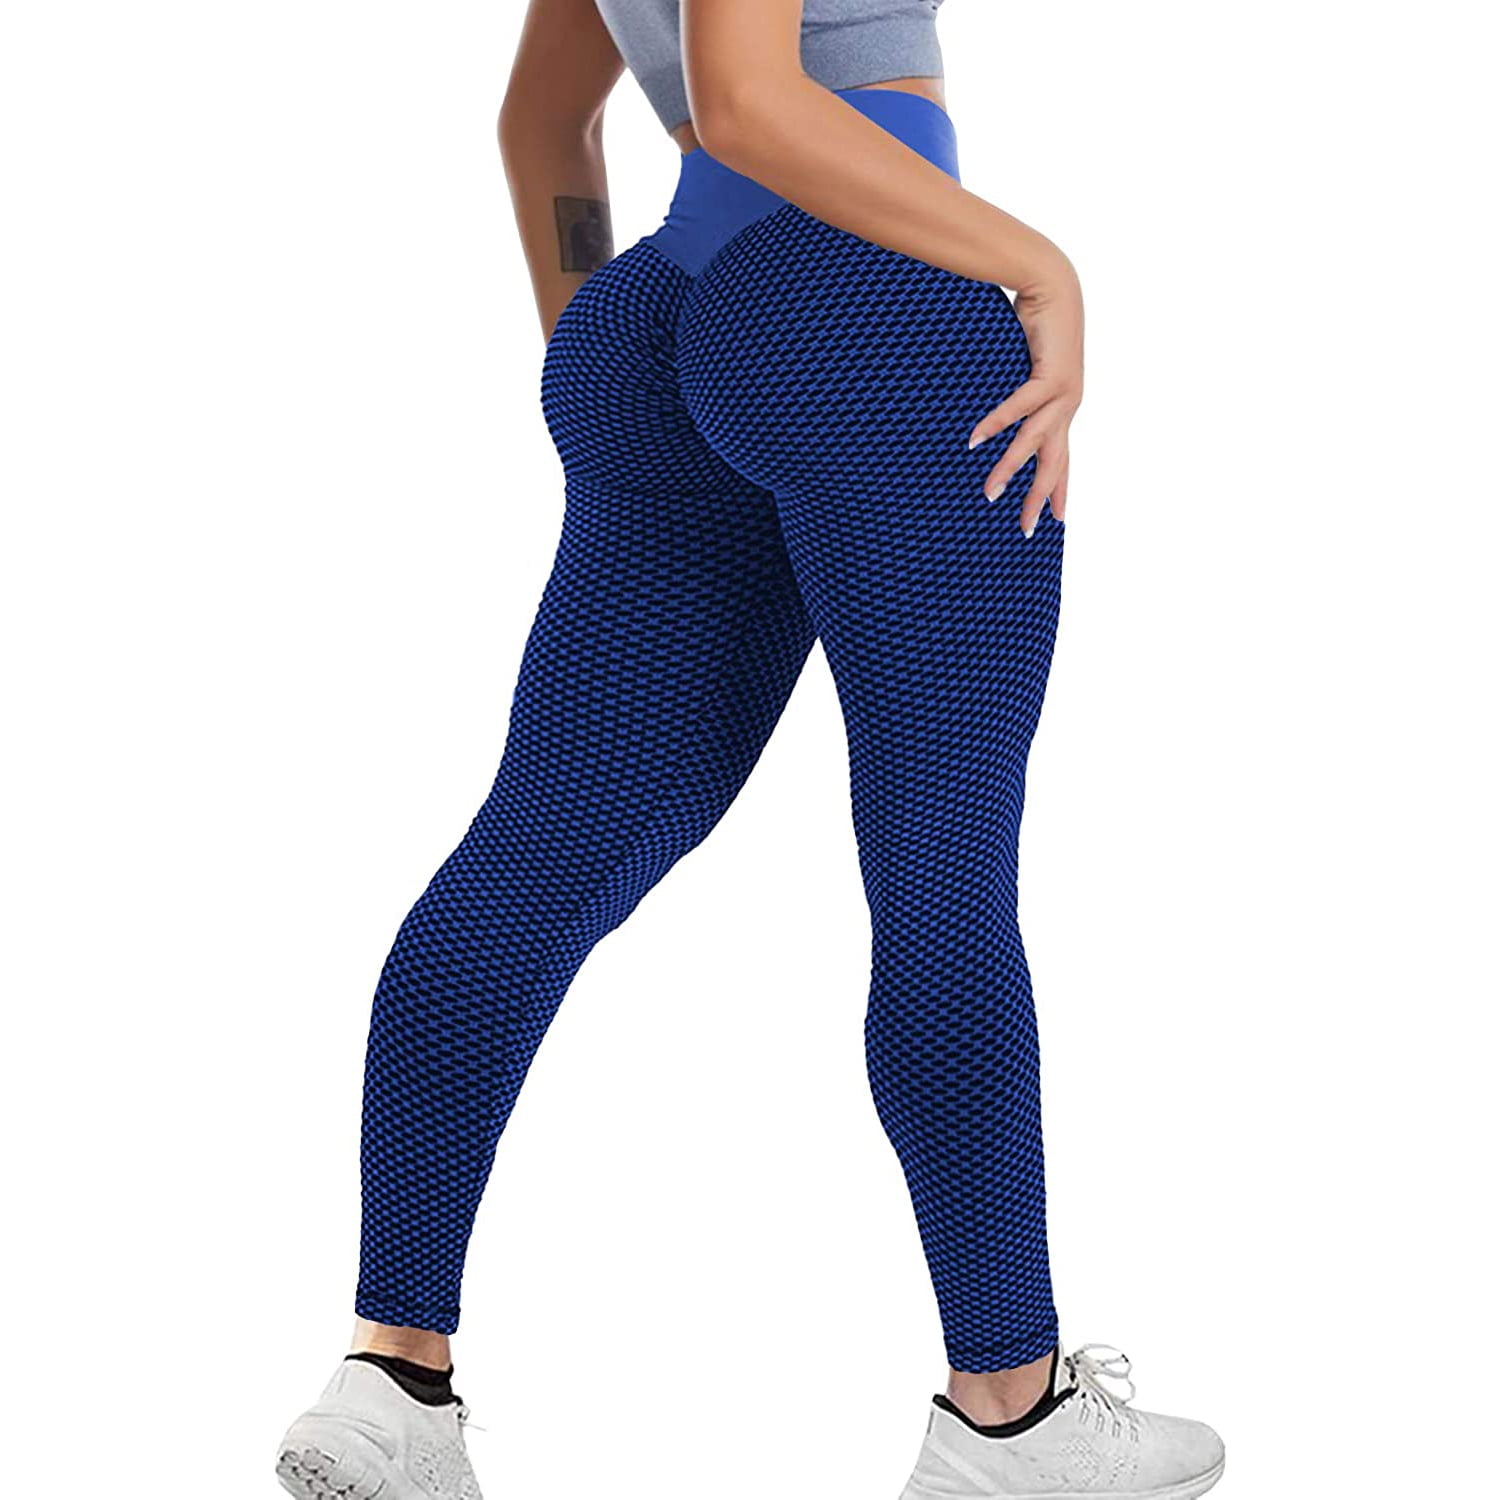 High Waist Yoga Pants for Women Tummy Control Stretch Yoga Leggings Workout Running Butt Lift Textured Tights 